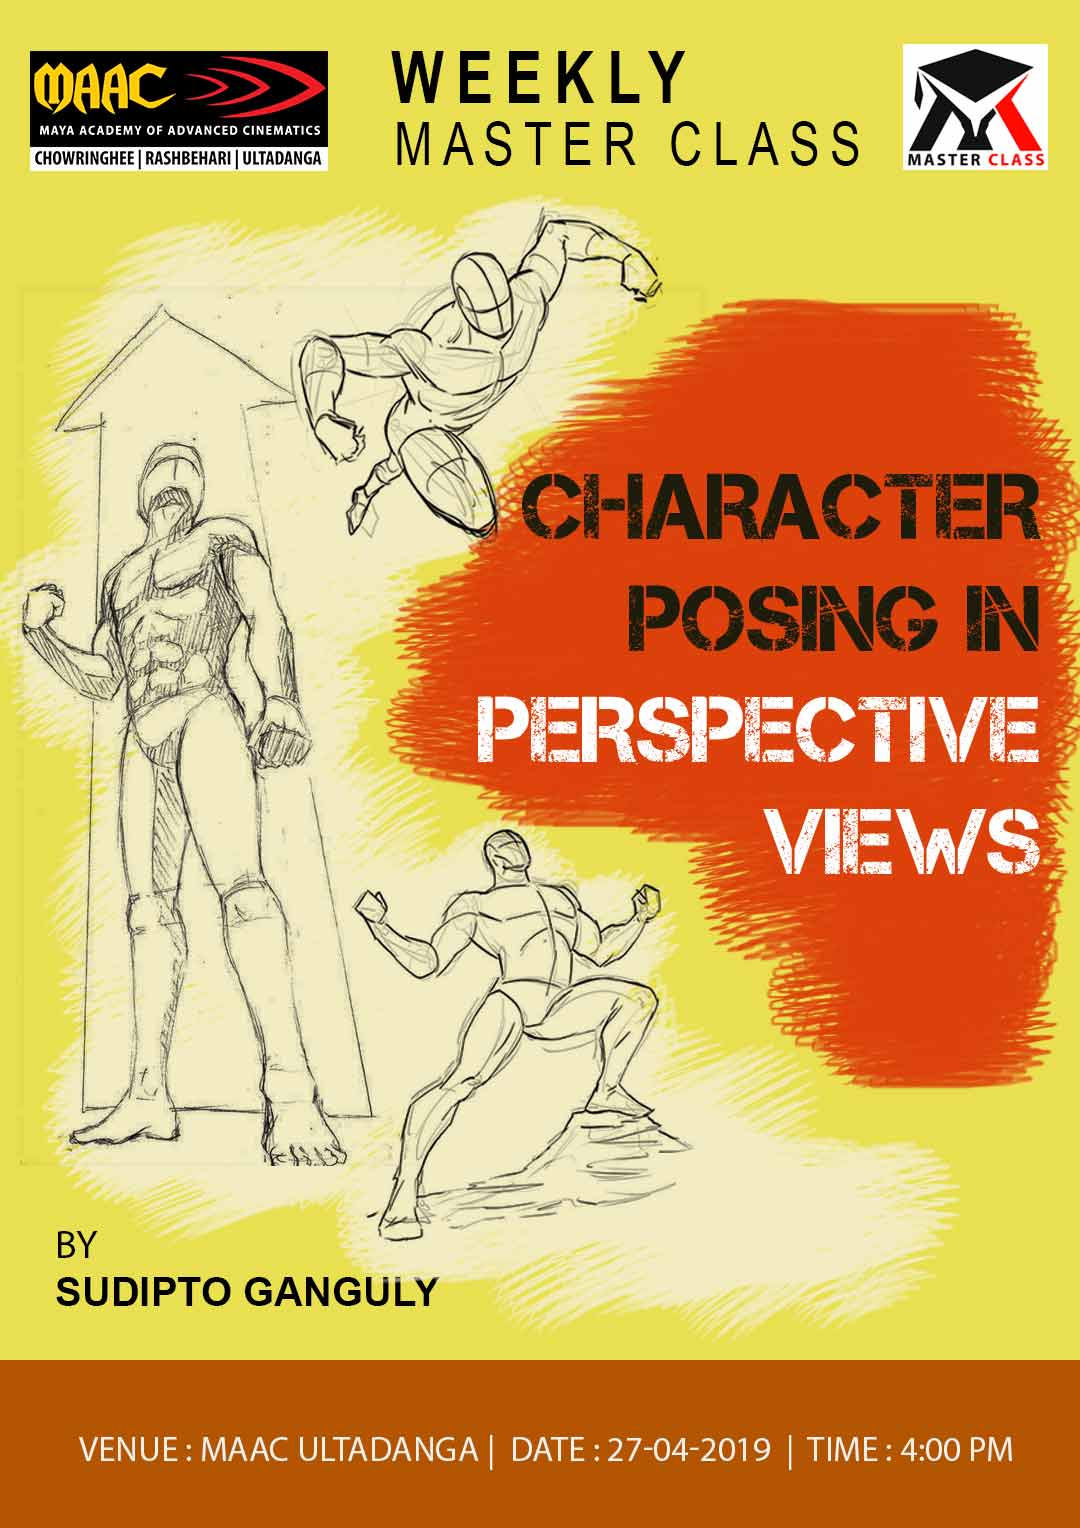 Weekly Master Class on Character Posing in Perspective views